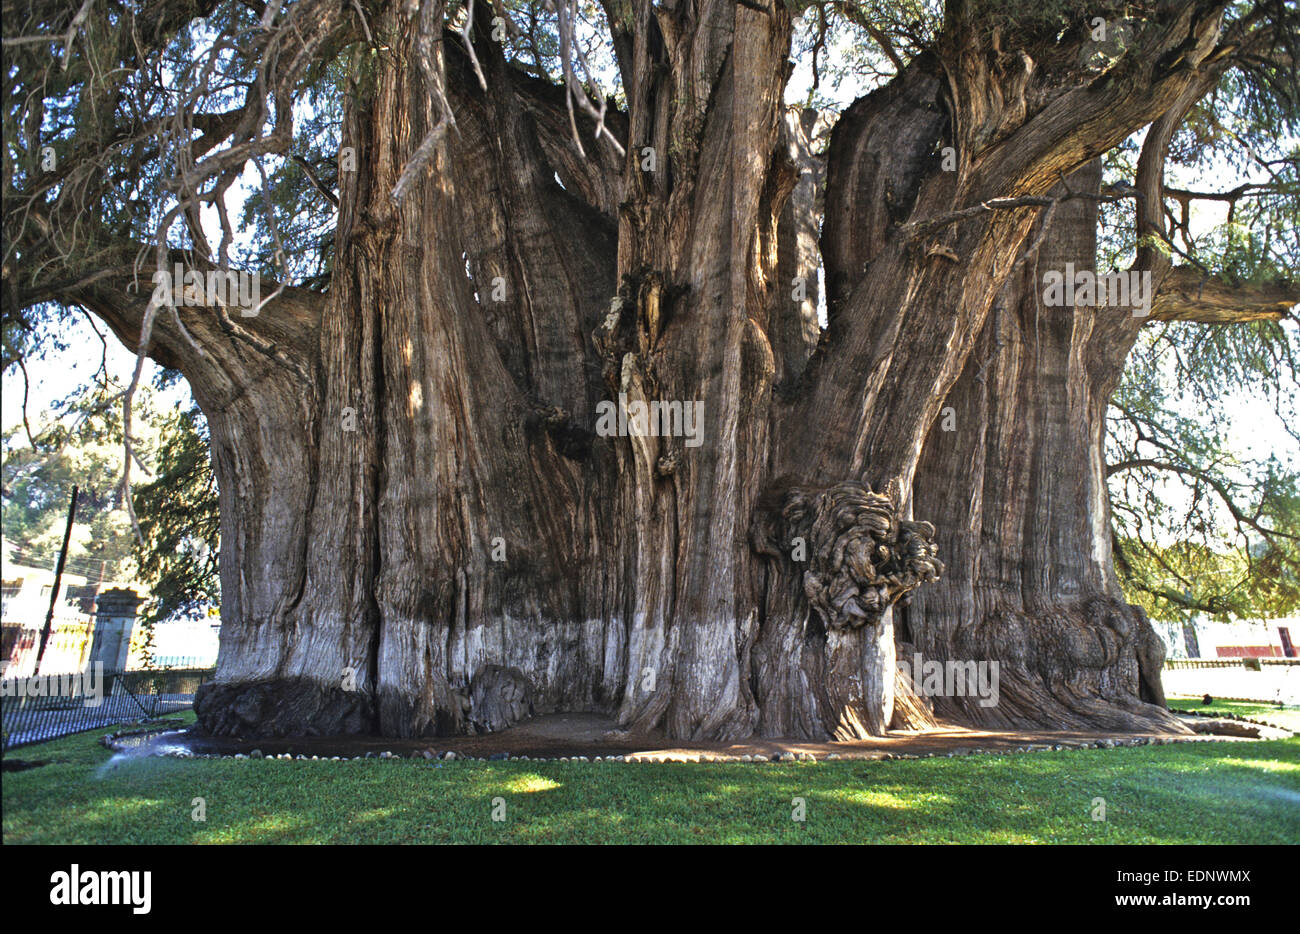 Mexico - the 2,000yr old Tule tree in Oaxaca with a circumference of nearly 55mtrs - it is a Montezuma Cypress (Taxodium mucronatum) Stock Photo